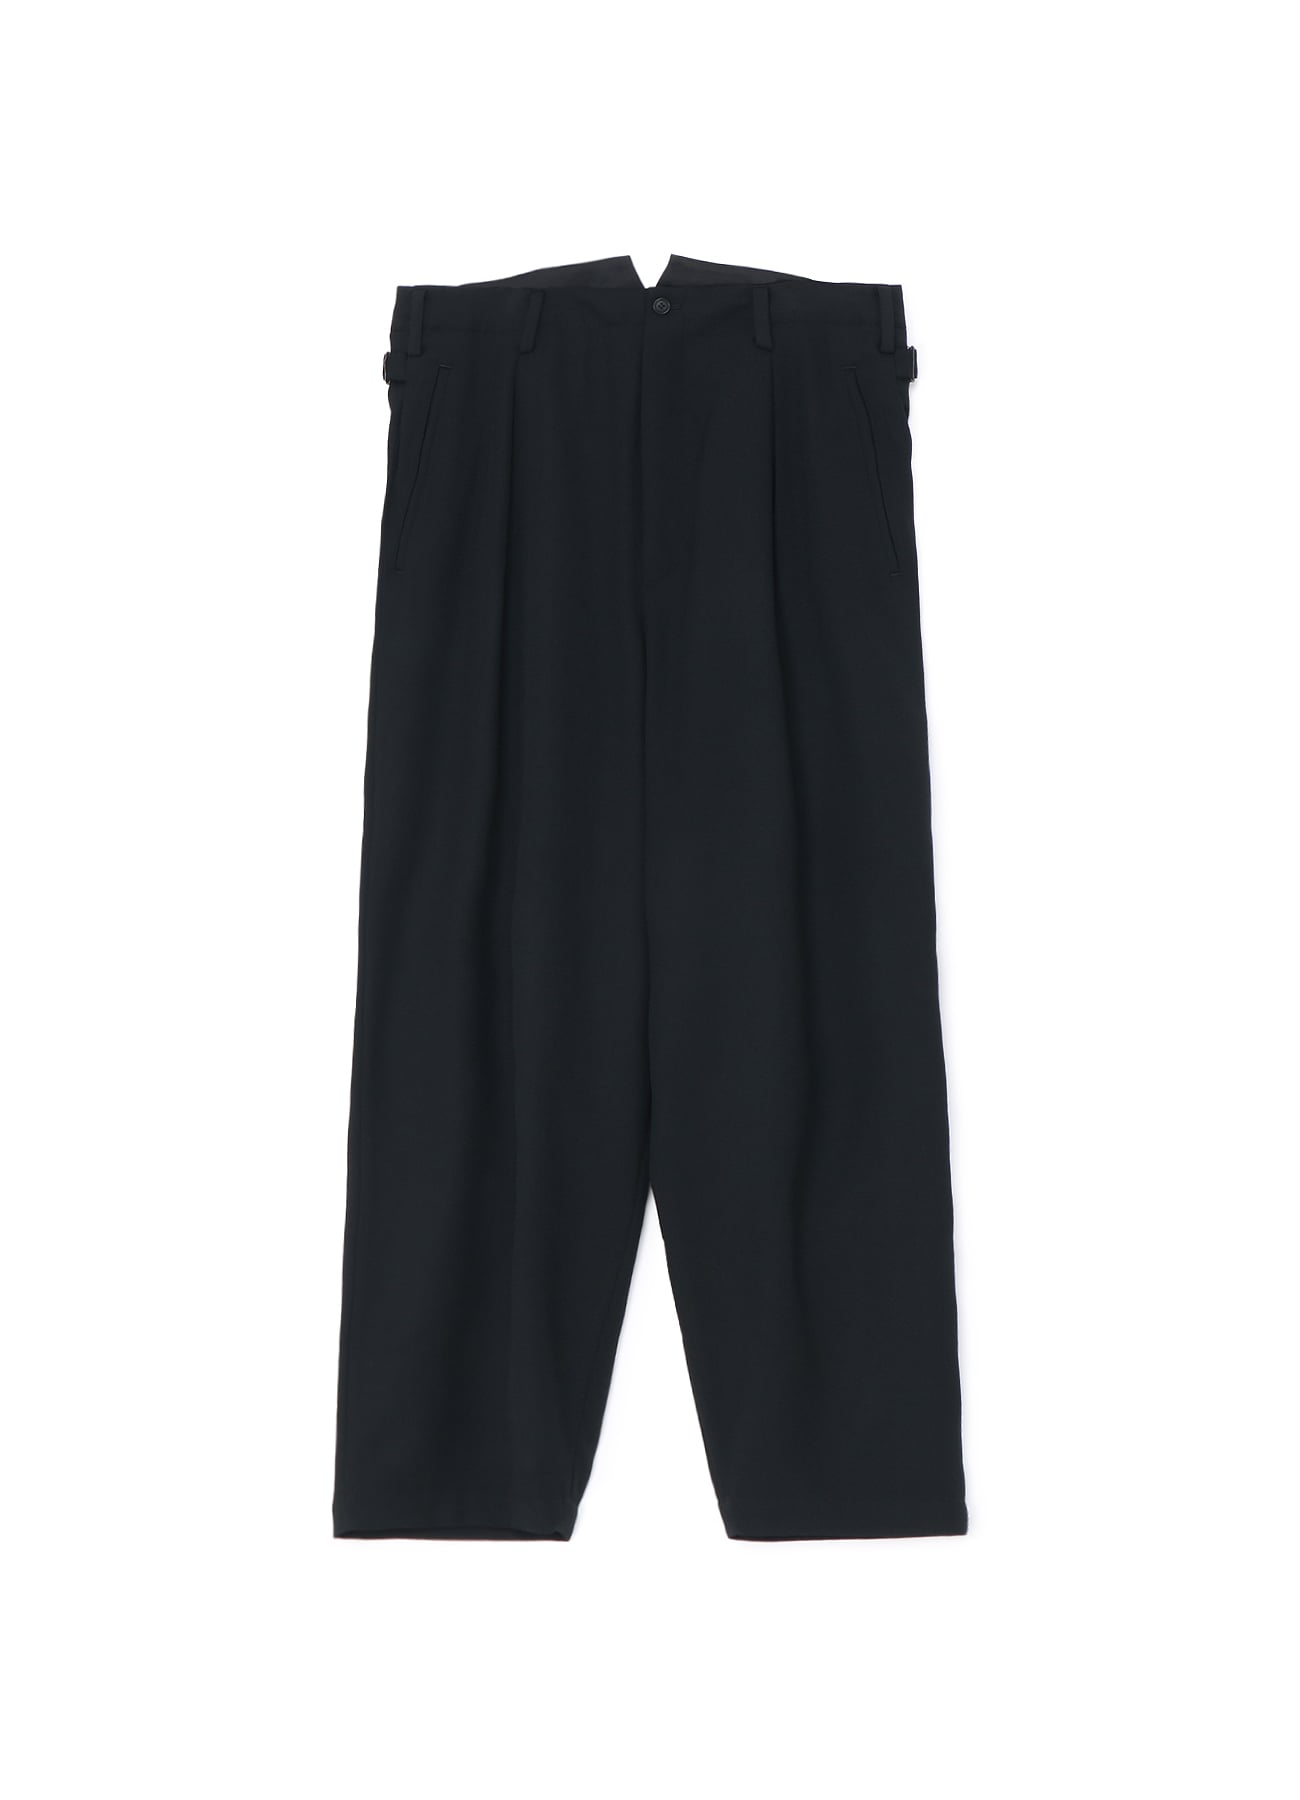 WOOL GABARDINE PANTS WITH SUSPENDER BUTTONS AND ADJUSTABLE SIDE TABS